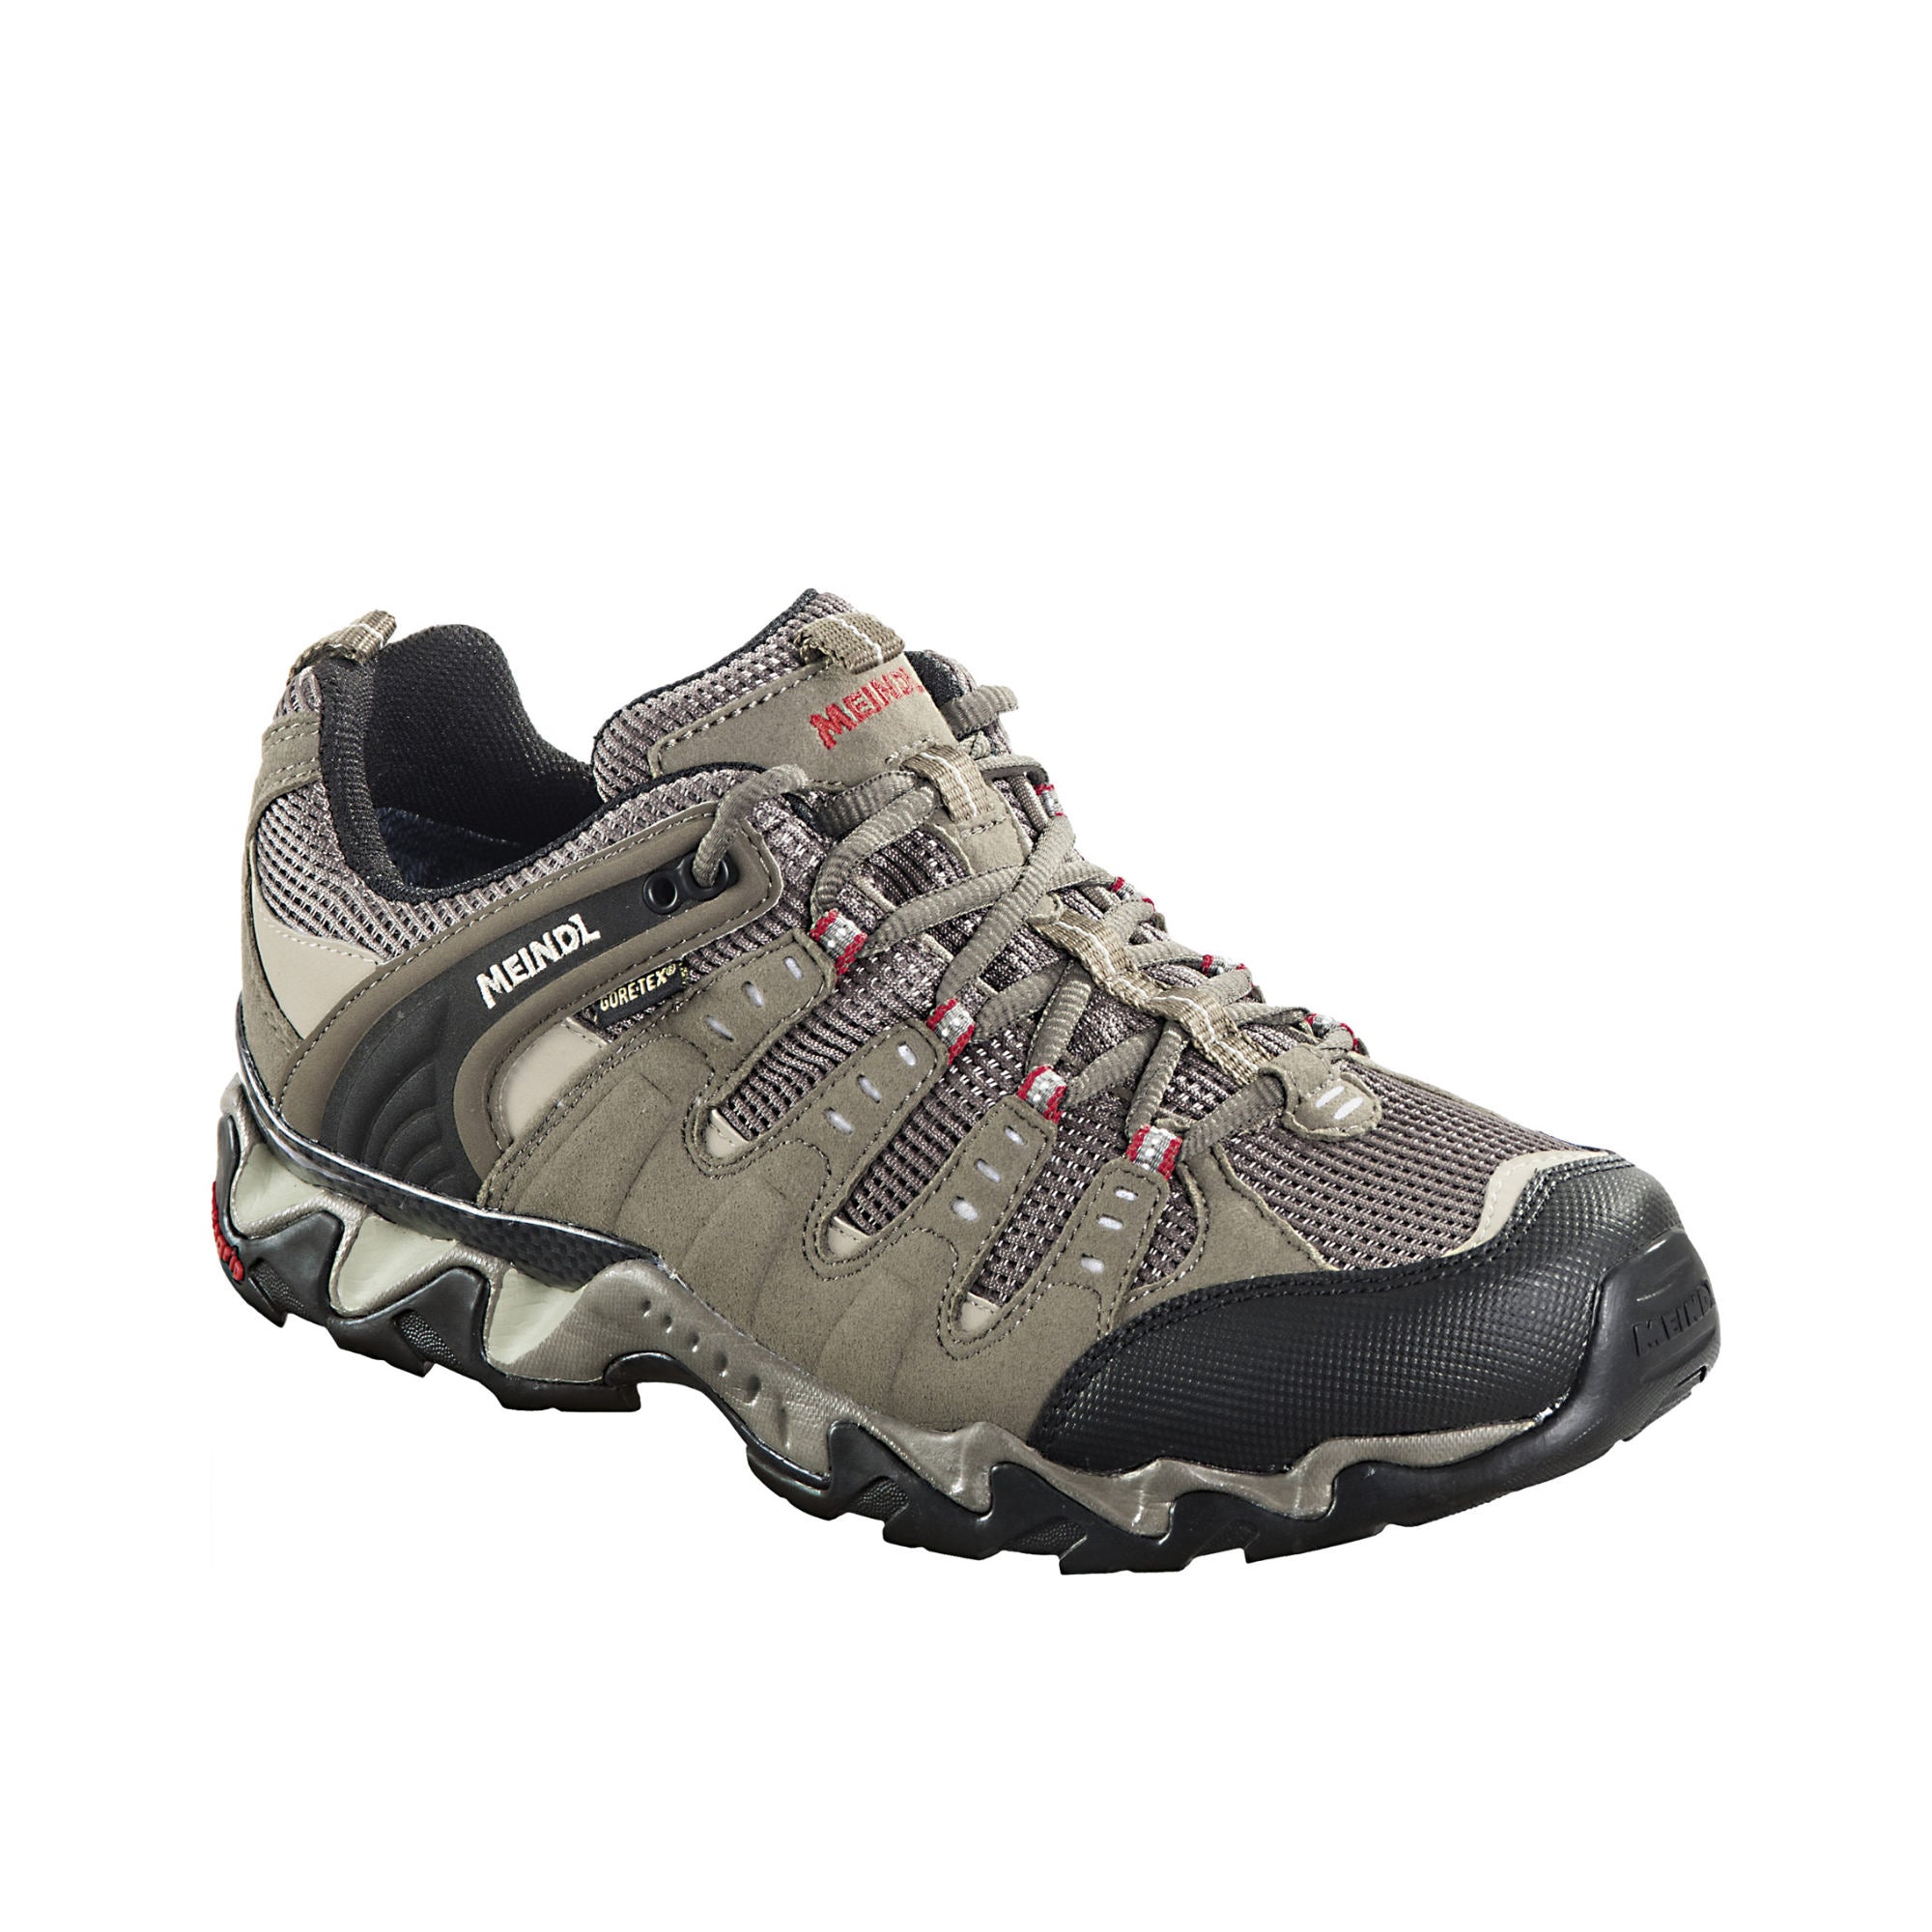 Meindl Respond GTX Walking Shoes - Reed